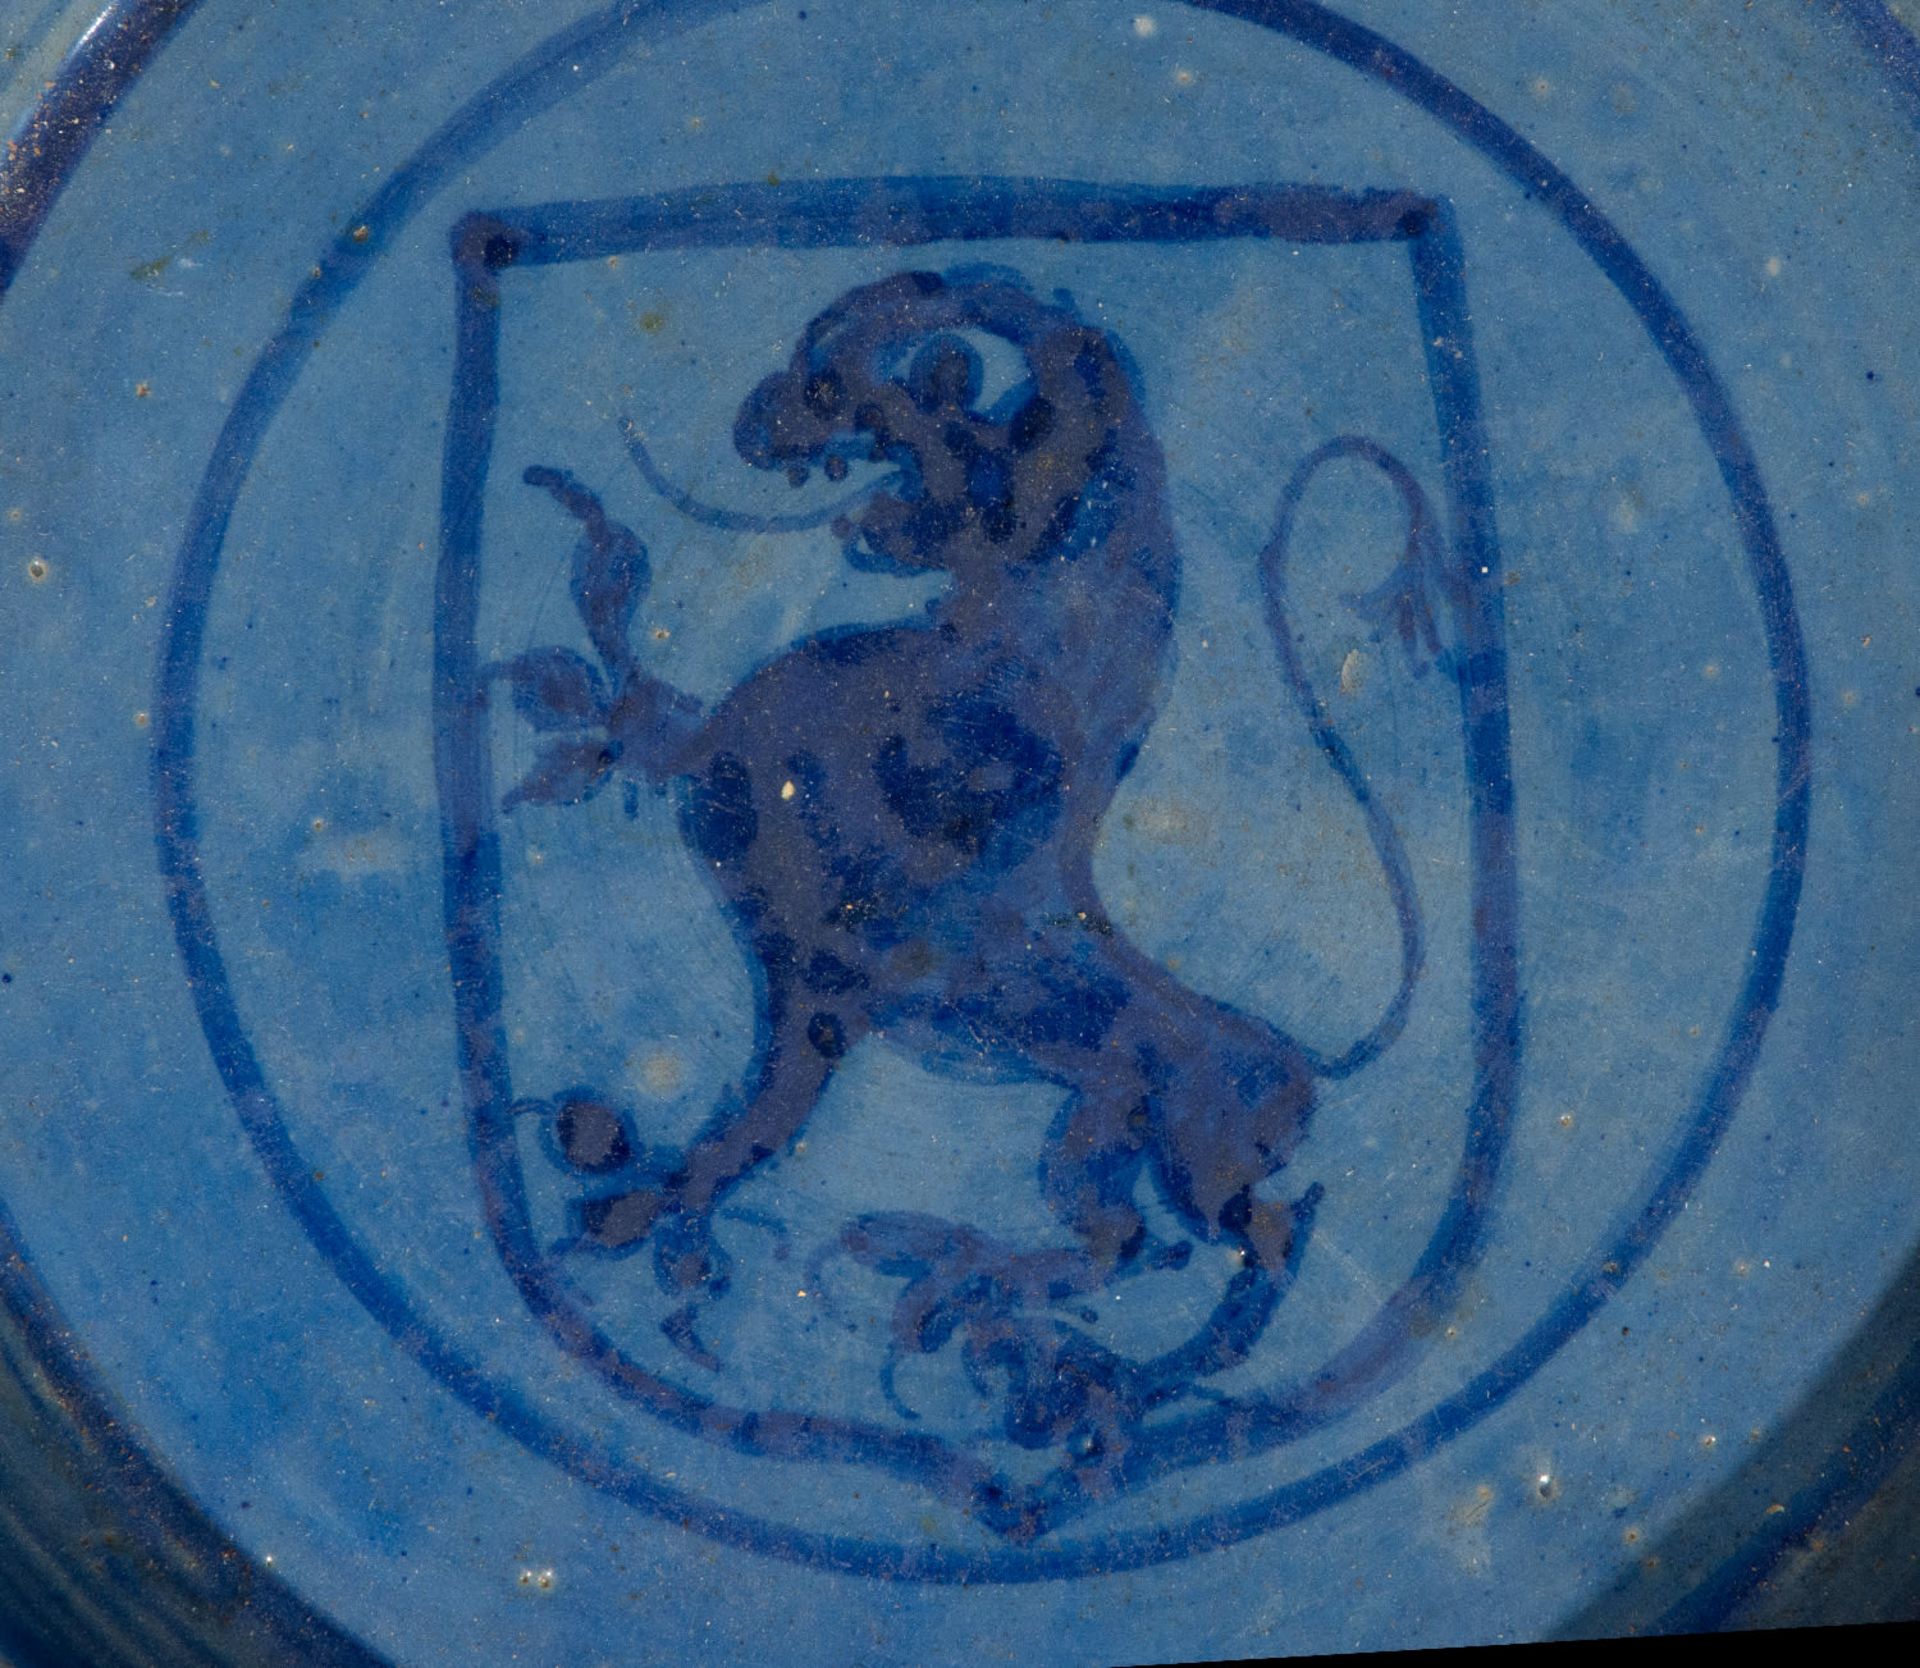 Spectacular Large Plate in enameled blue from Manises with Lion rampant from the 16th century - Image 2 of 4